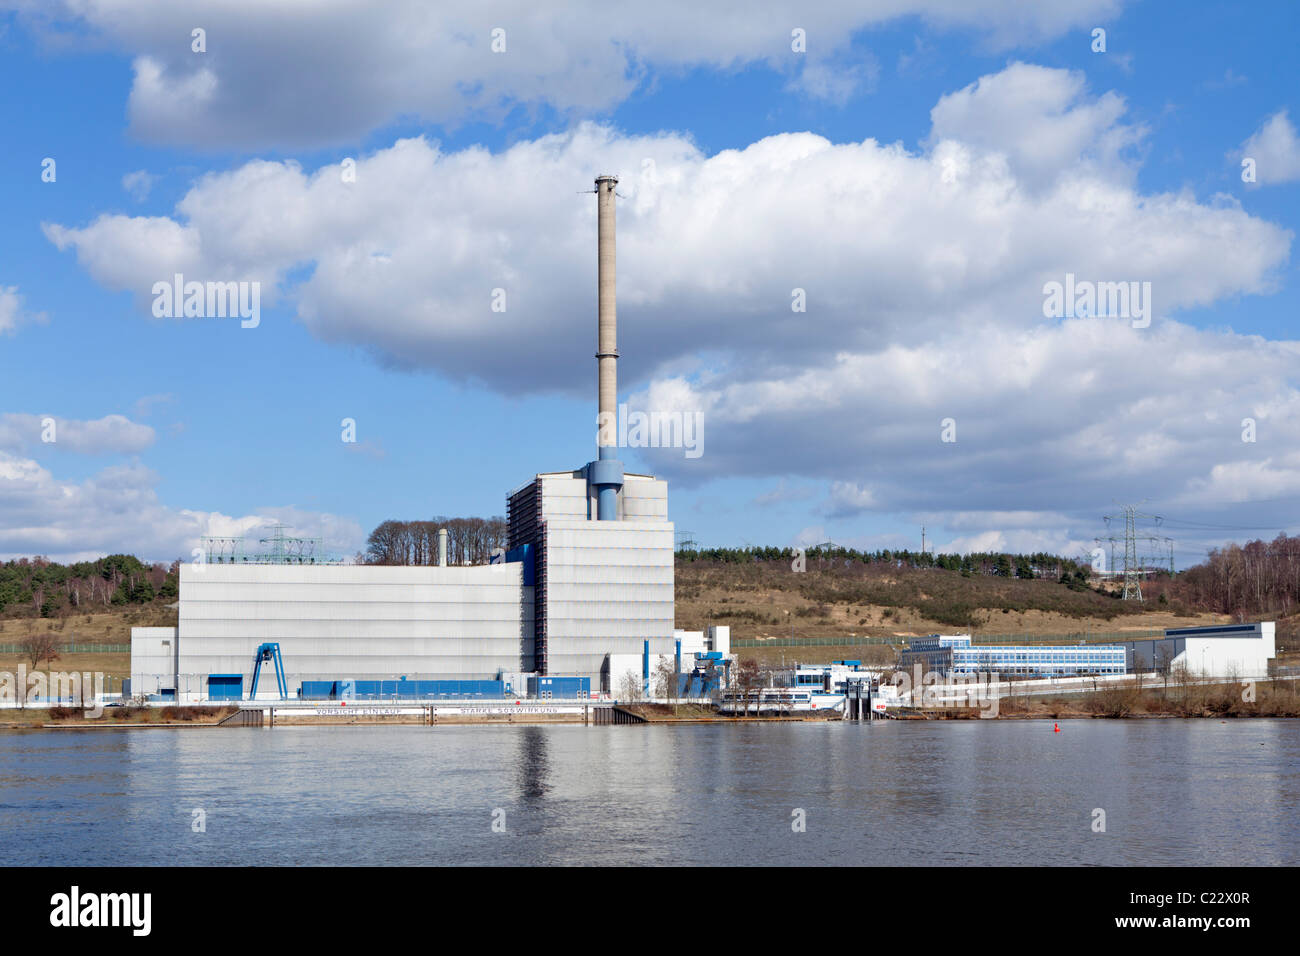 Centrale nucleare Kruemmel vicino Geesthacht, Schleswig-Holstein, Germania Foto Stock